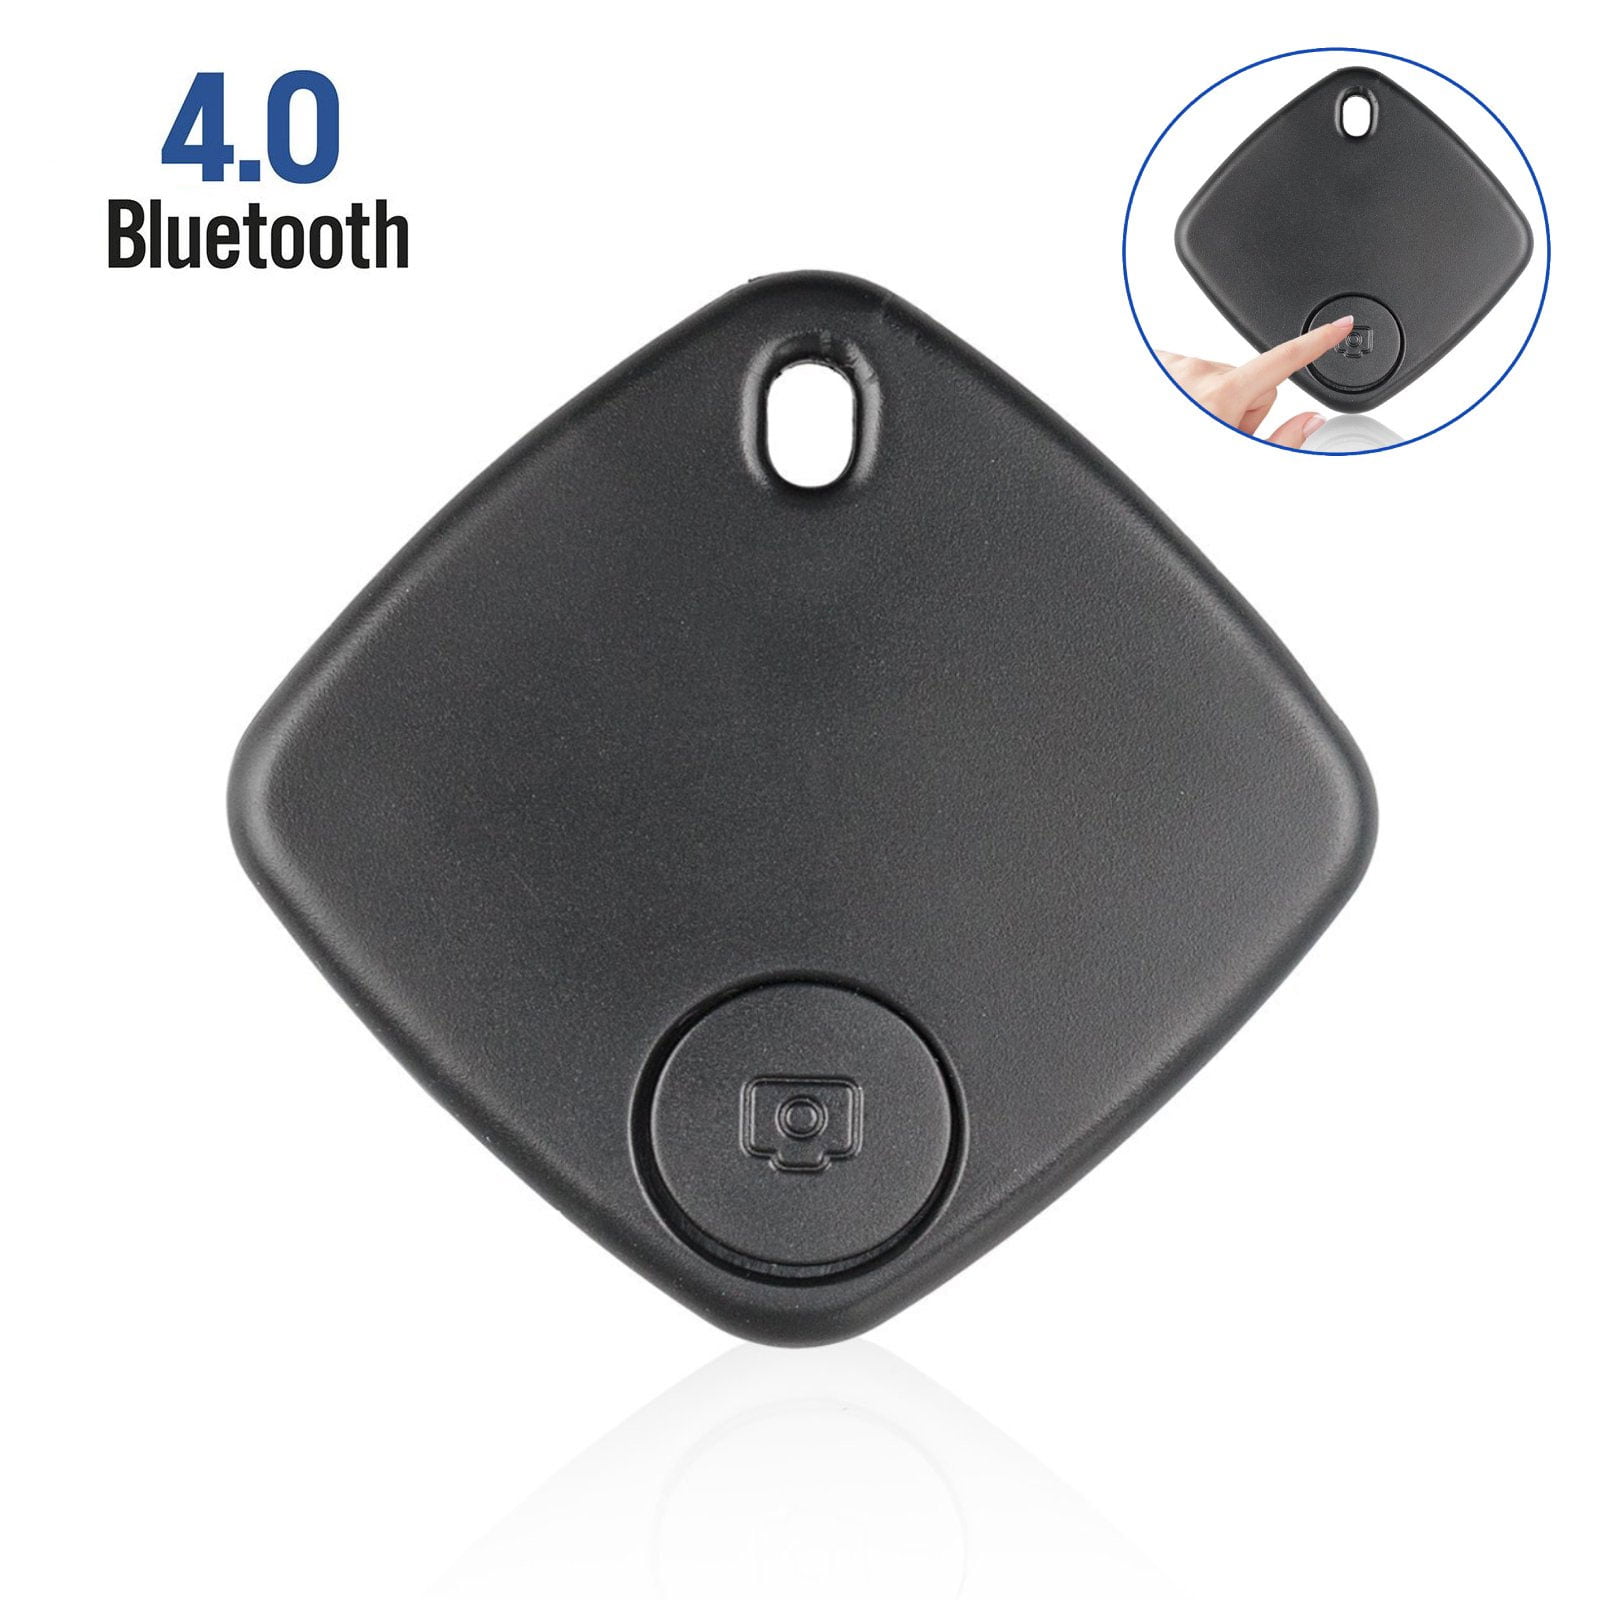 Black Bluetooth Tracker for Dogs Kids Cats Luggage Wallet Hicollie Mini Cat/Dog GPS Tracking Locator Cube Key Finder Smart Tracker Tracking Loss Prevention Waterproof Device Pet Locator